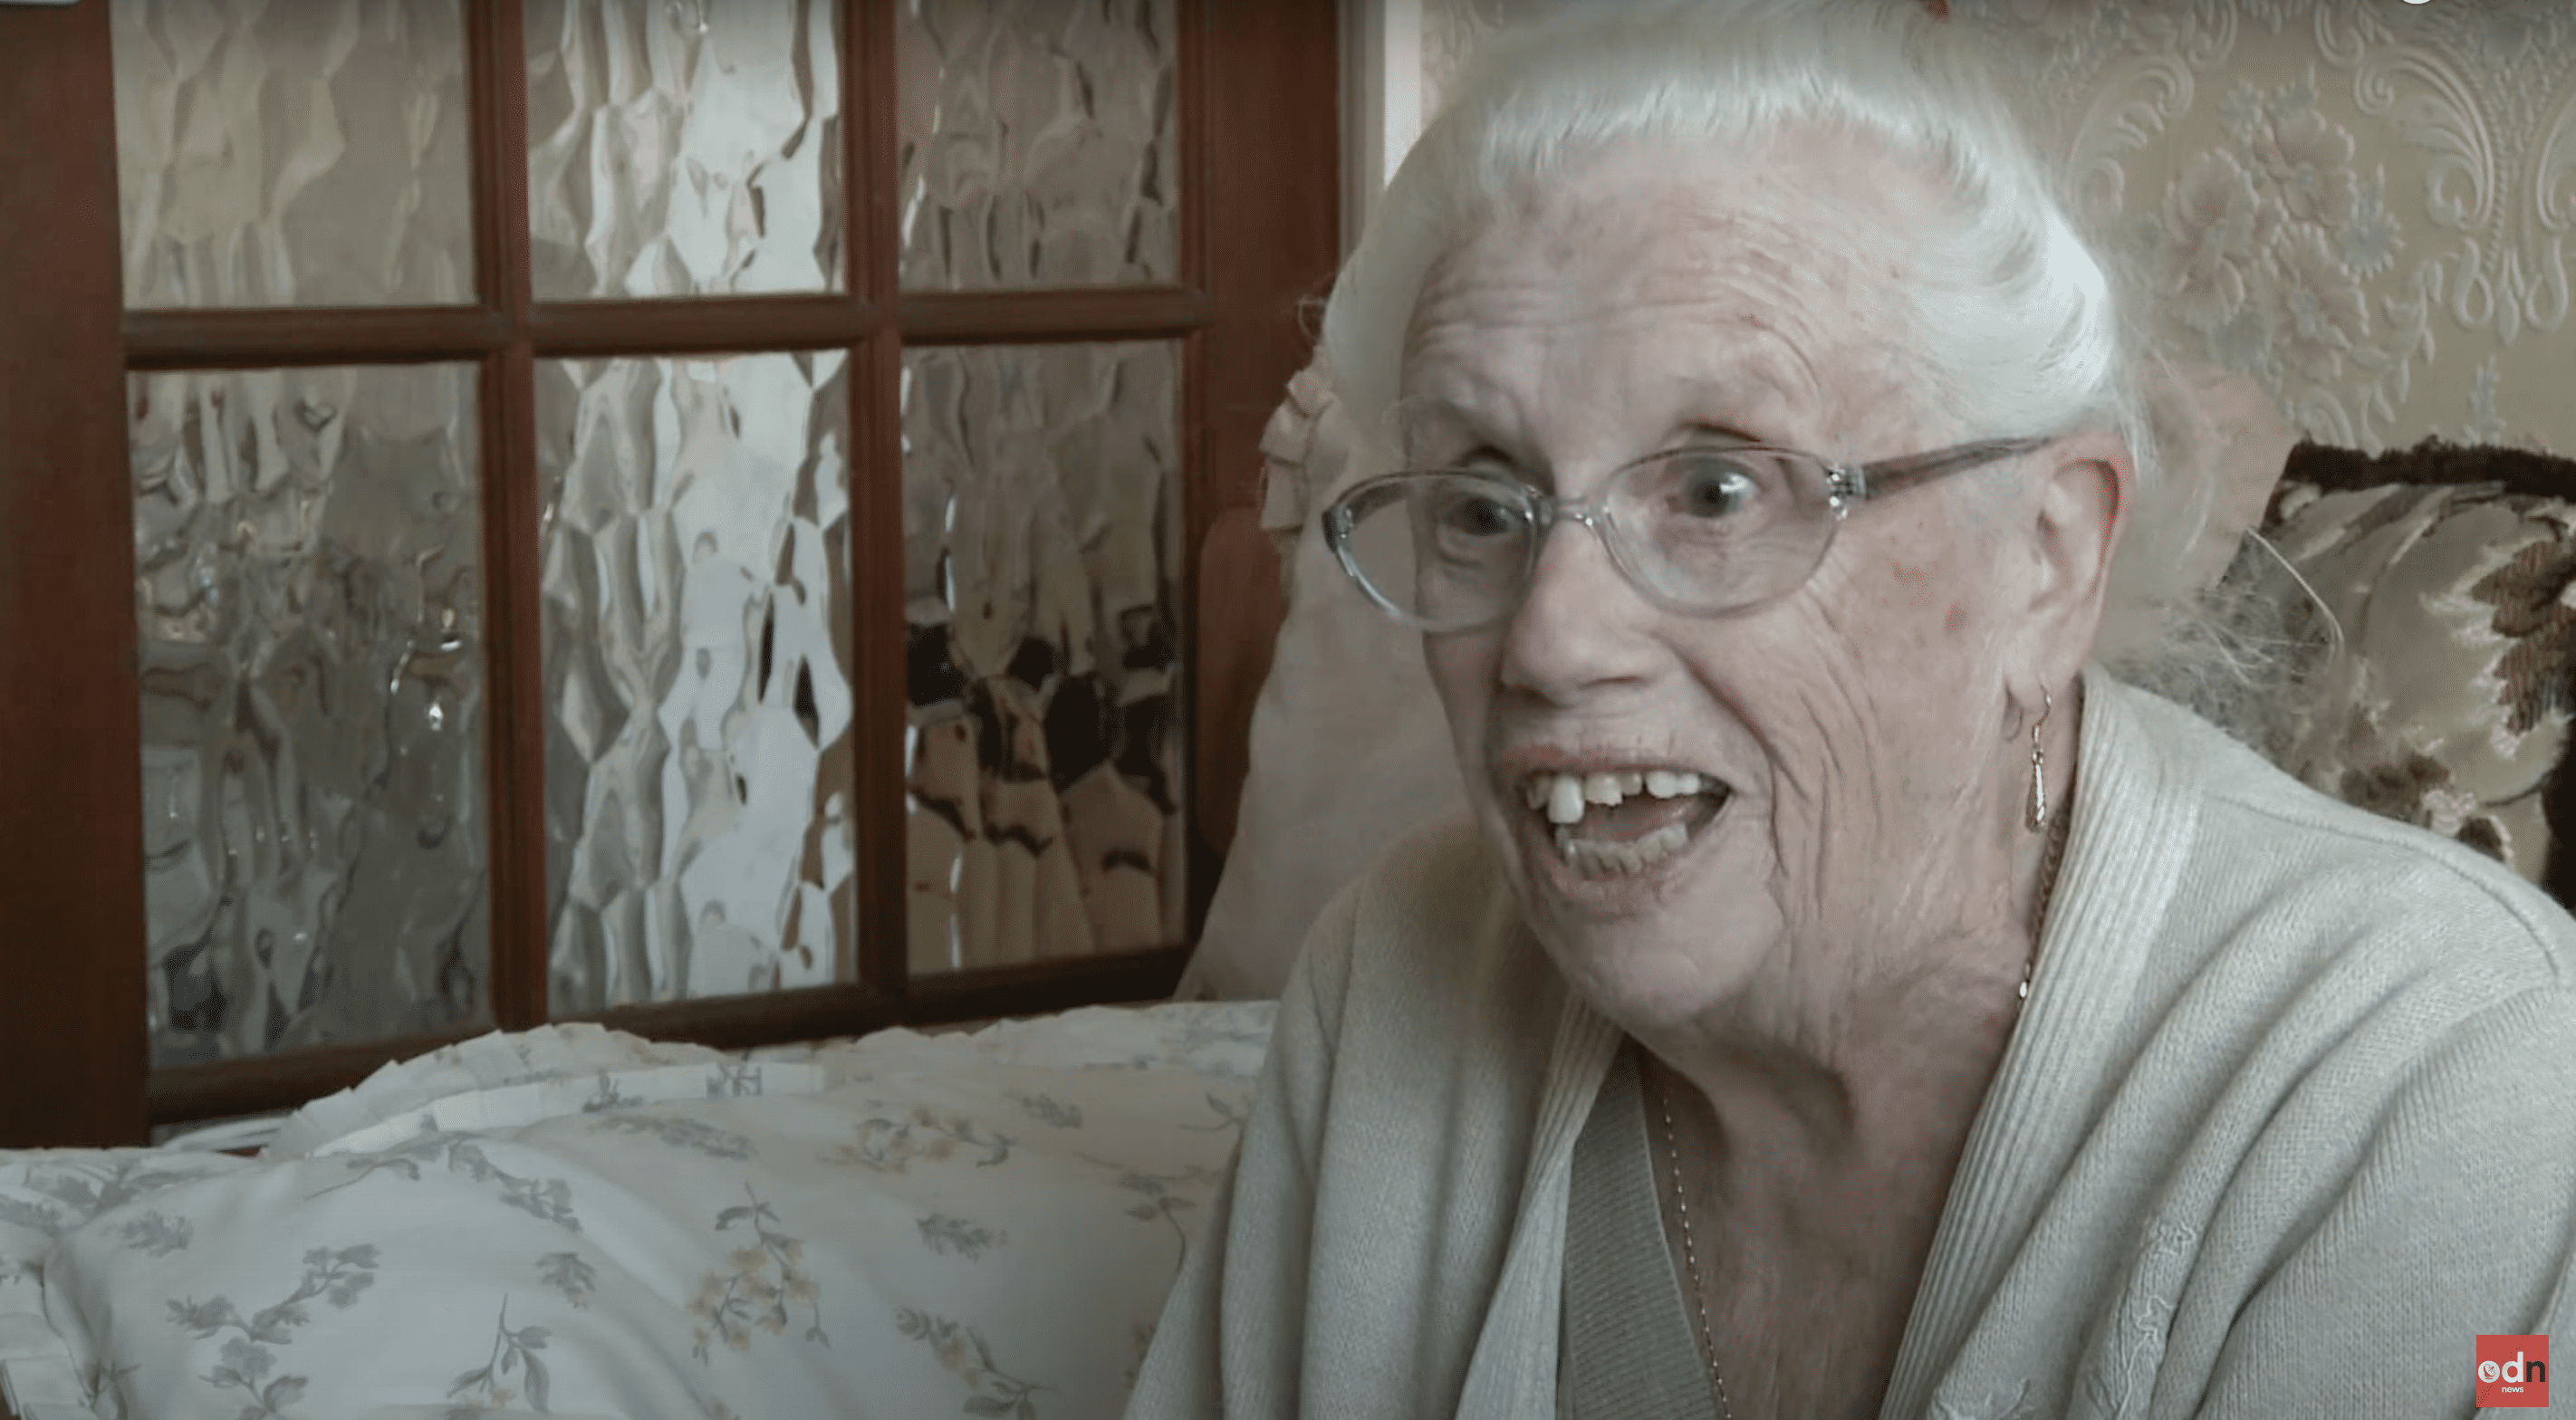 Doreen Mann, the 87-year-old pensioner from Essex.  |  Source: YouTube.com/On Demand News